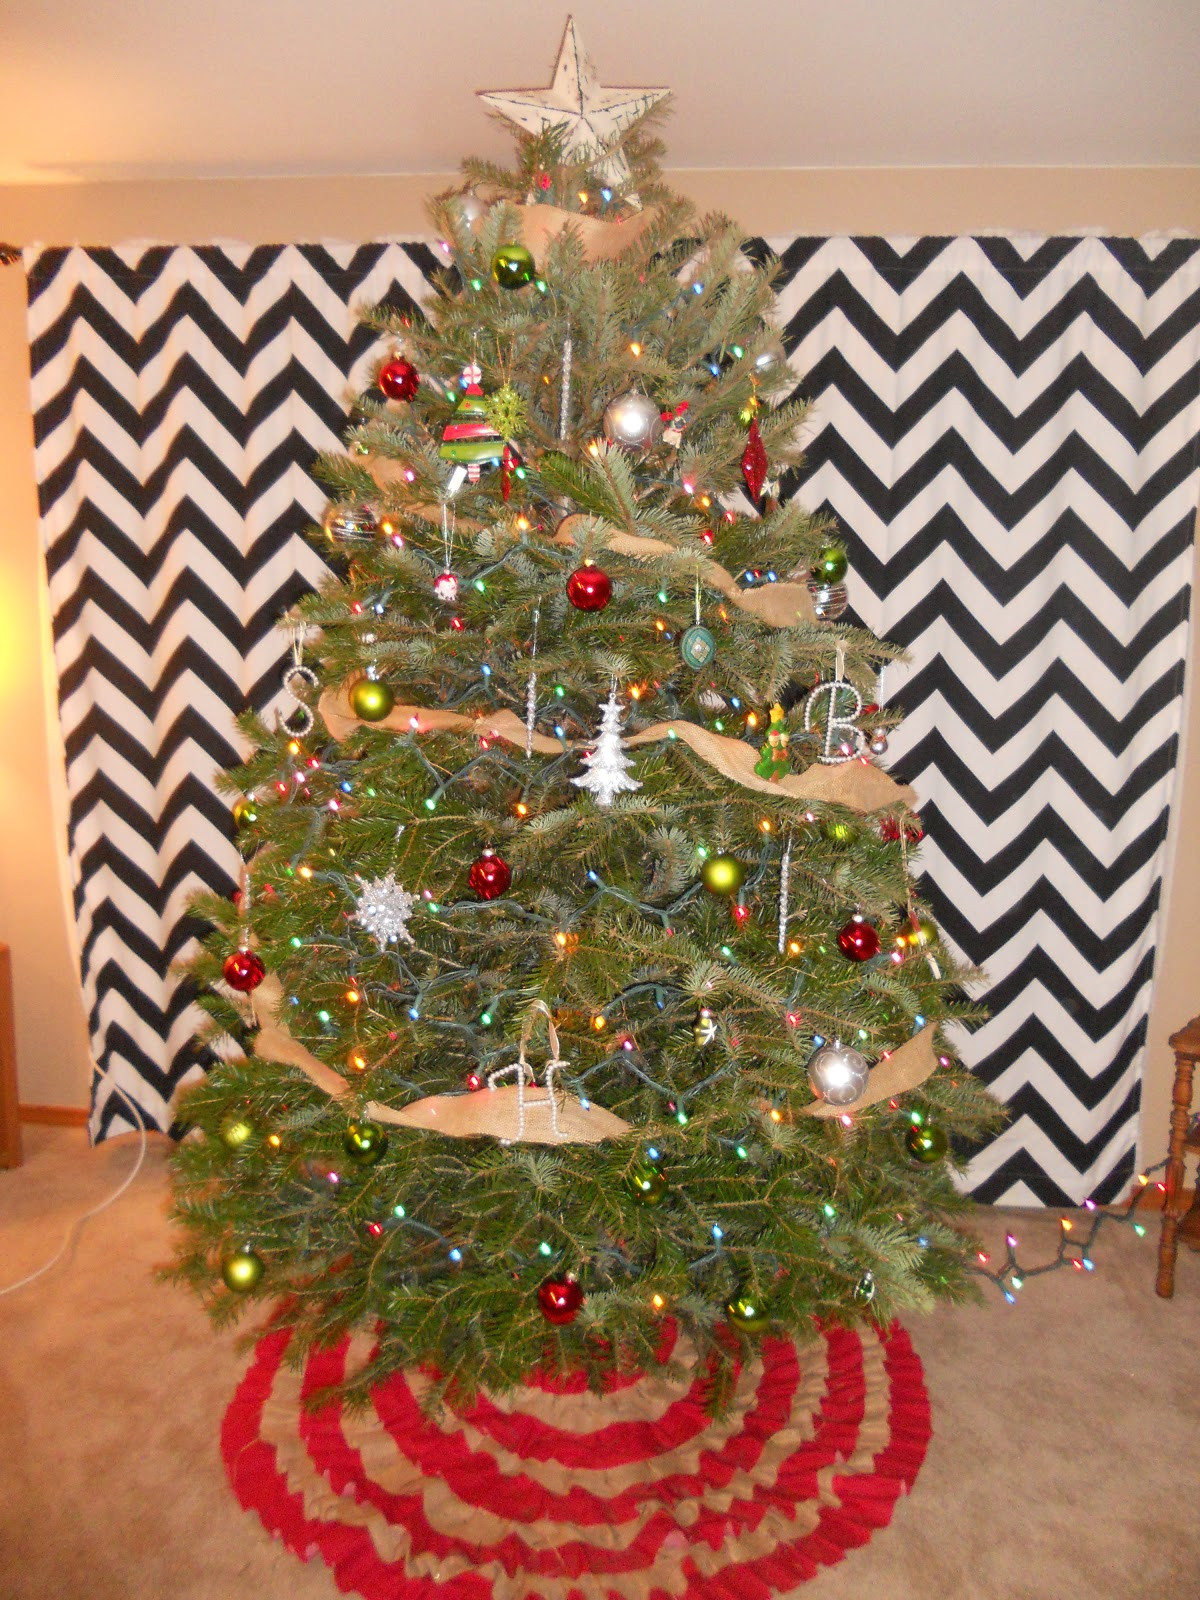 DIY Christmas Tree Skirts
 Woman In Transition DIY Christmas Tree Skirt